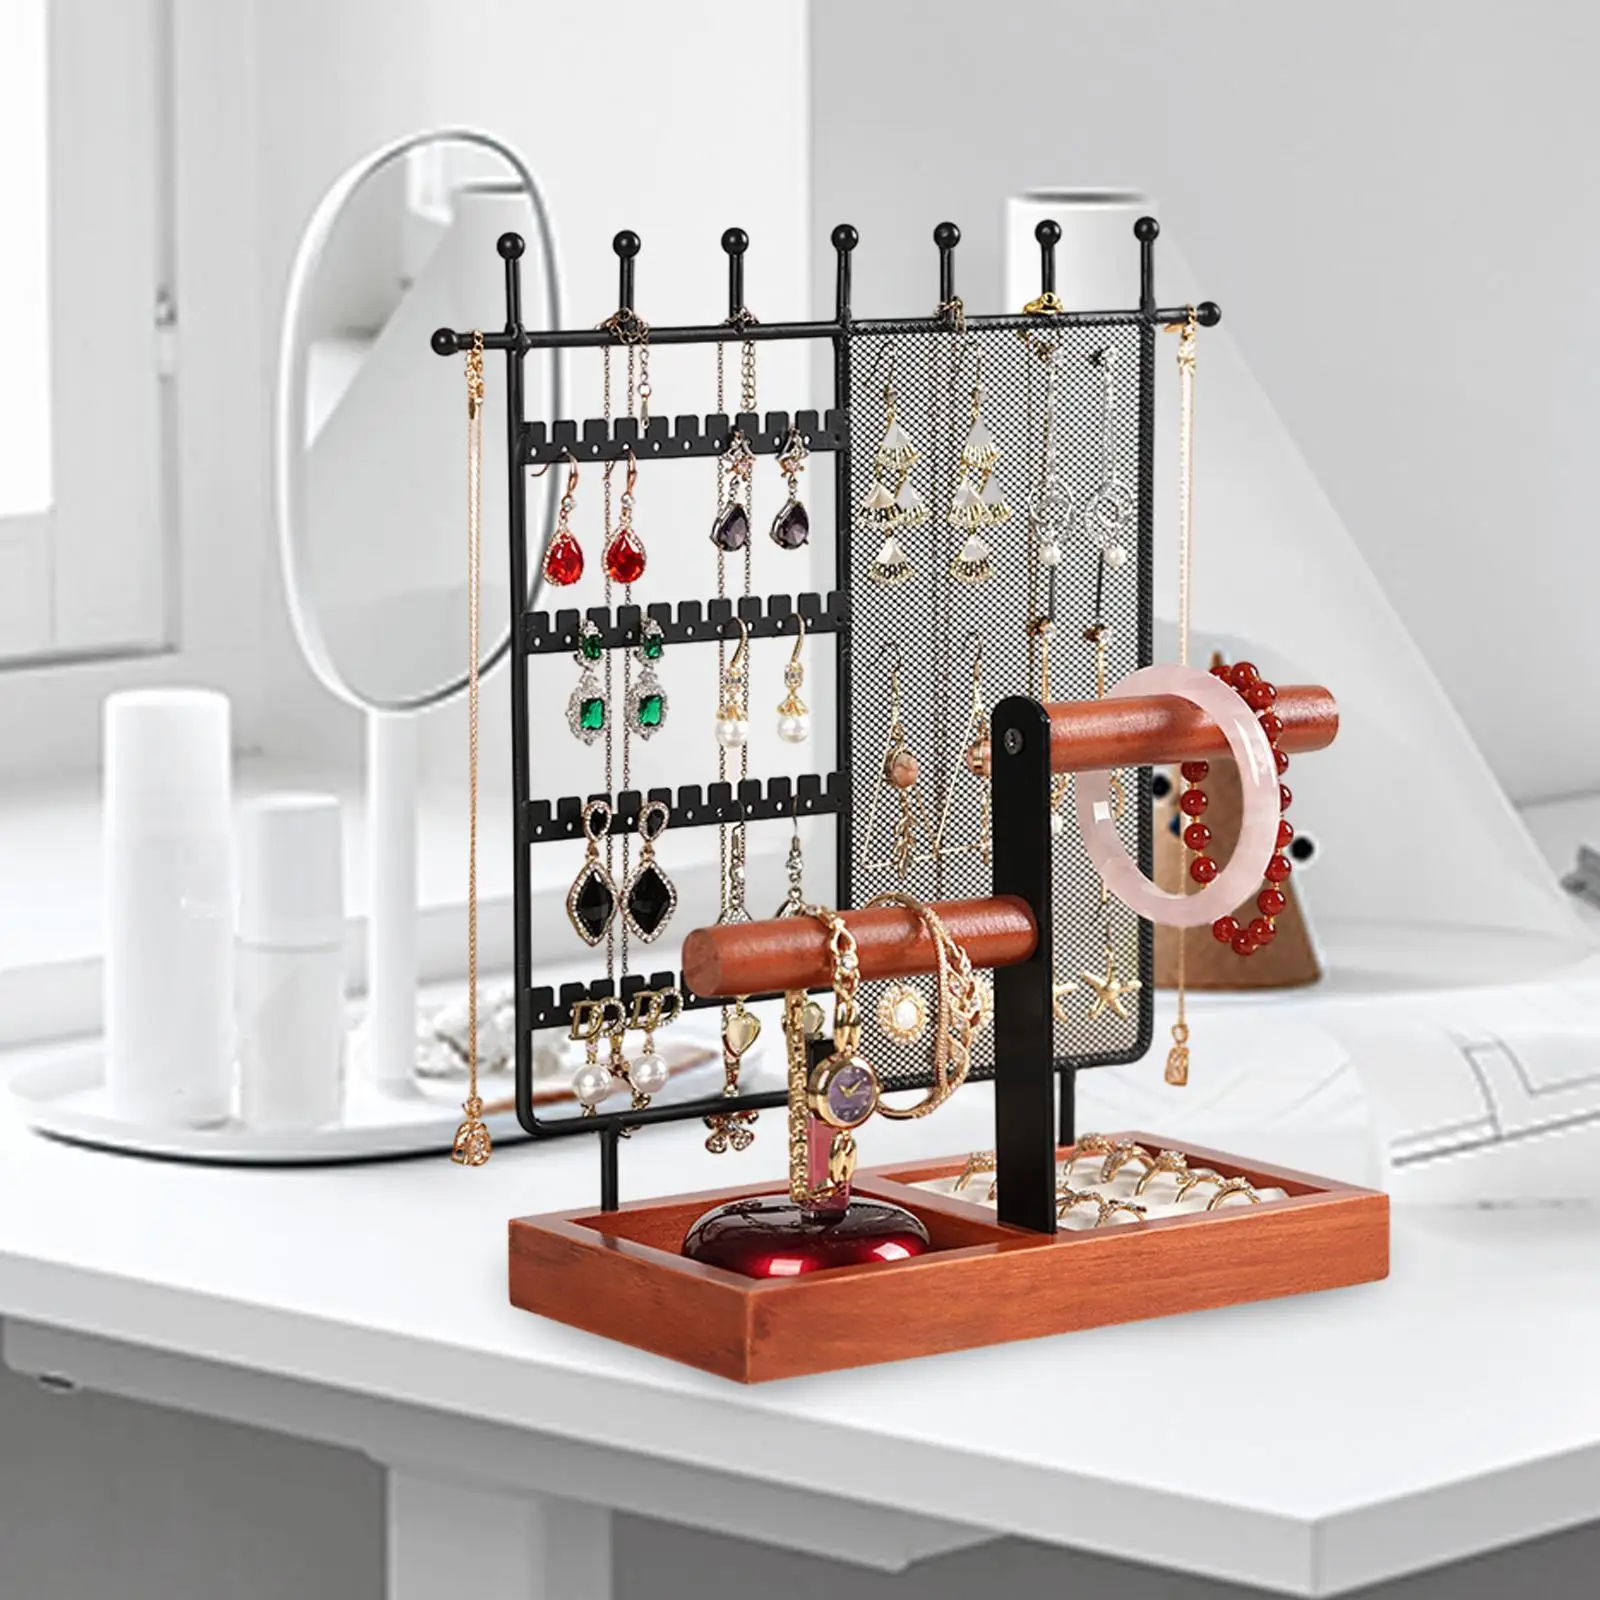 Jewelry Display Rack Jewelry Tower, Earrings Rack Jewelry Holder, Necklace Earring Organizer for Jewelry Store Live Broadcast